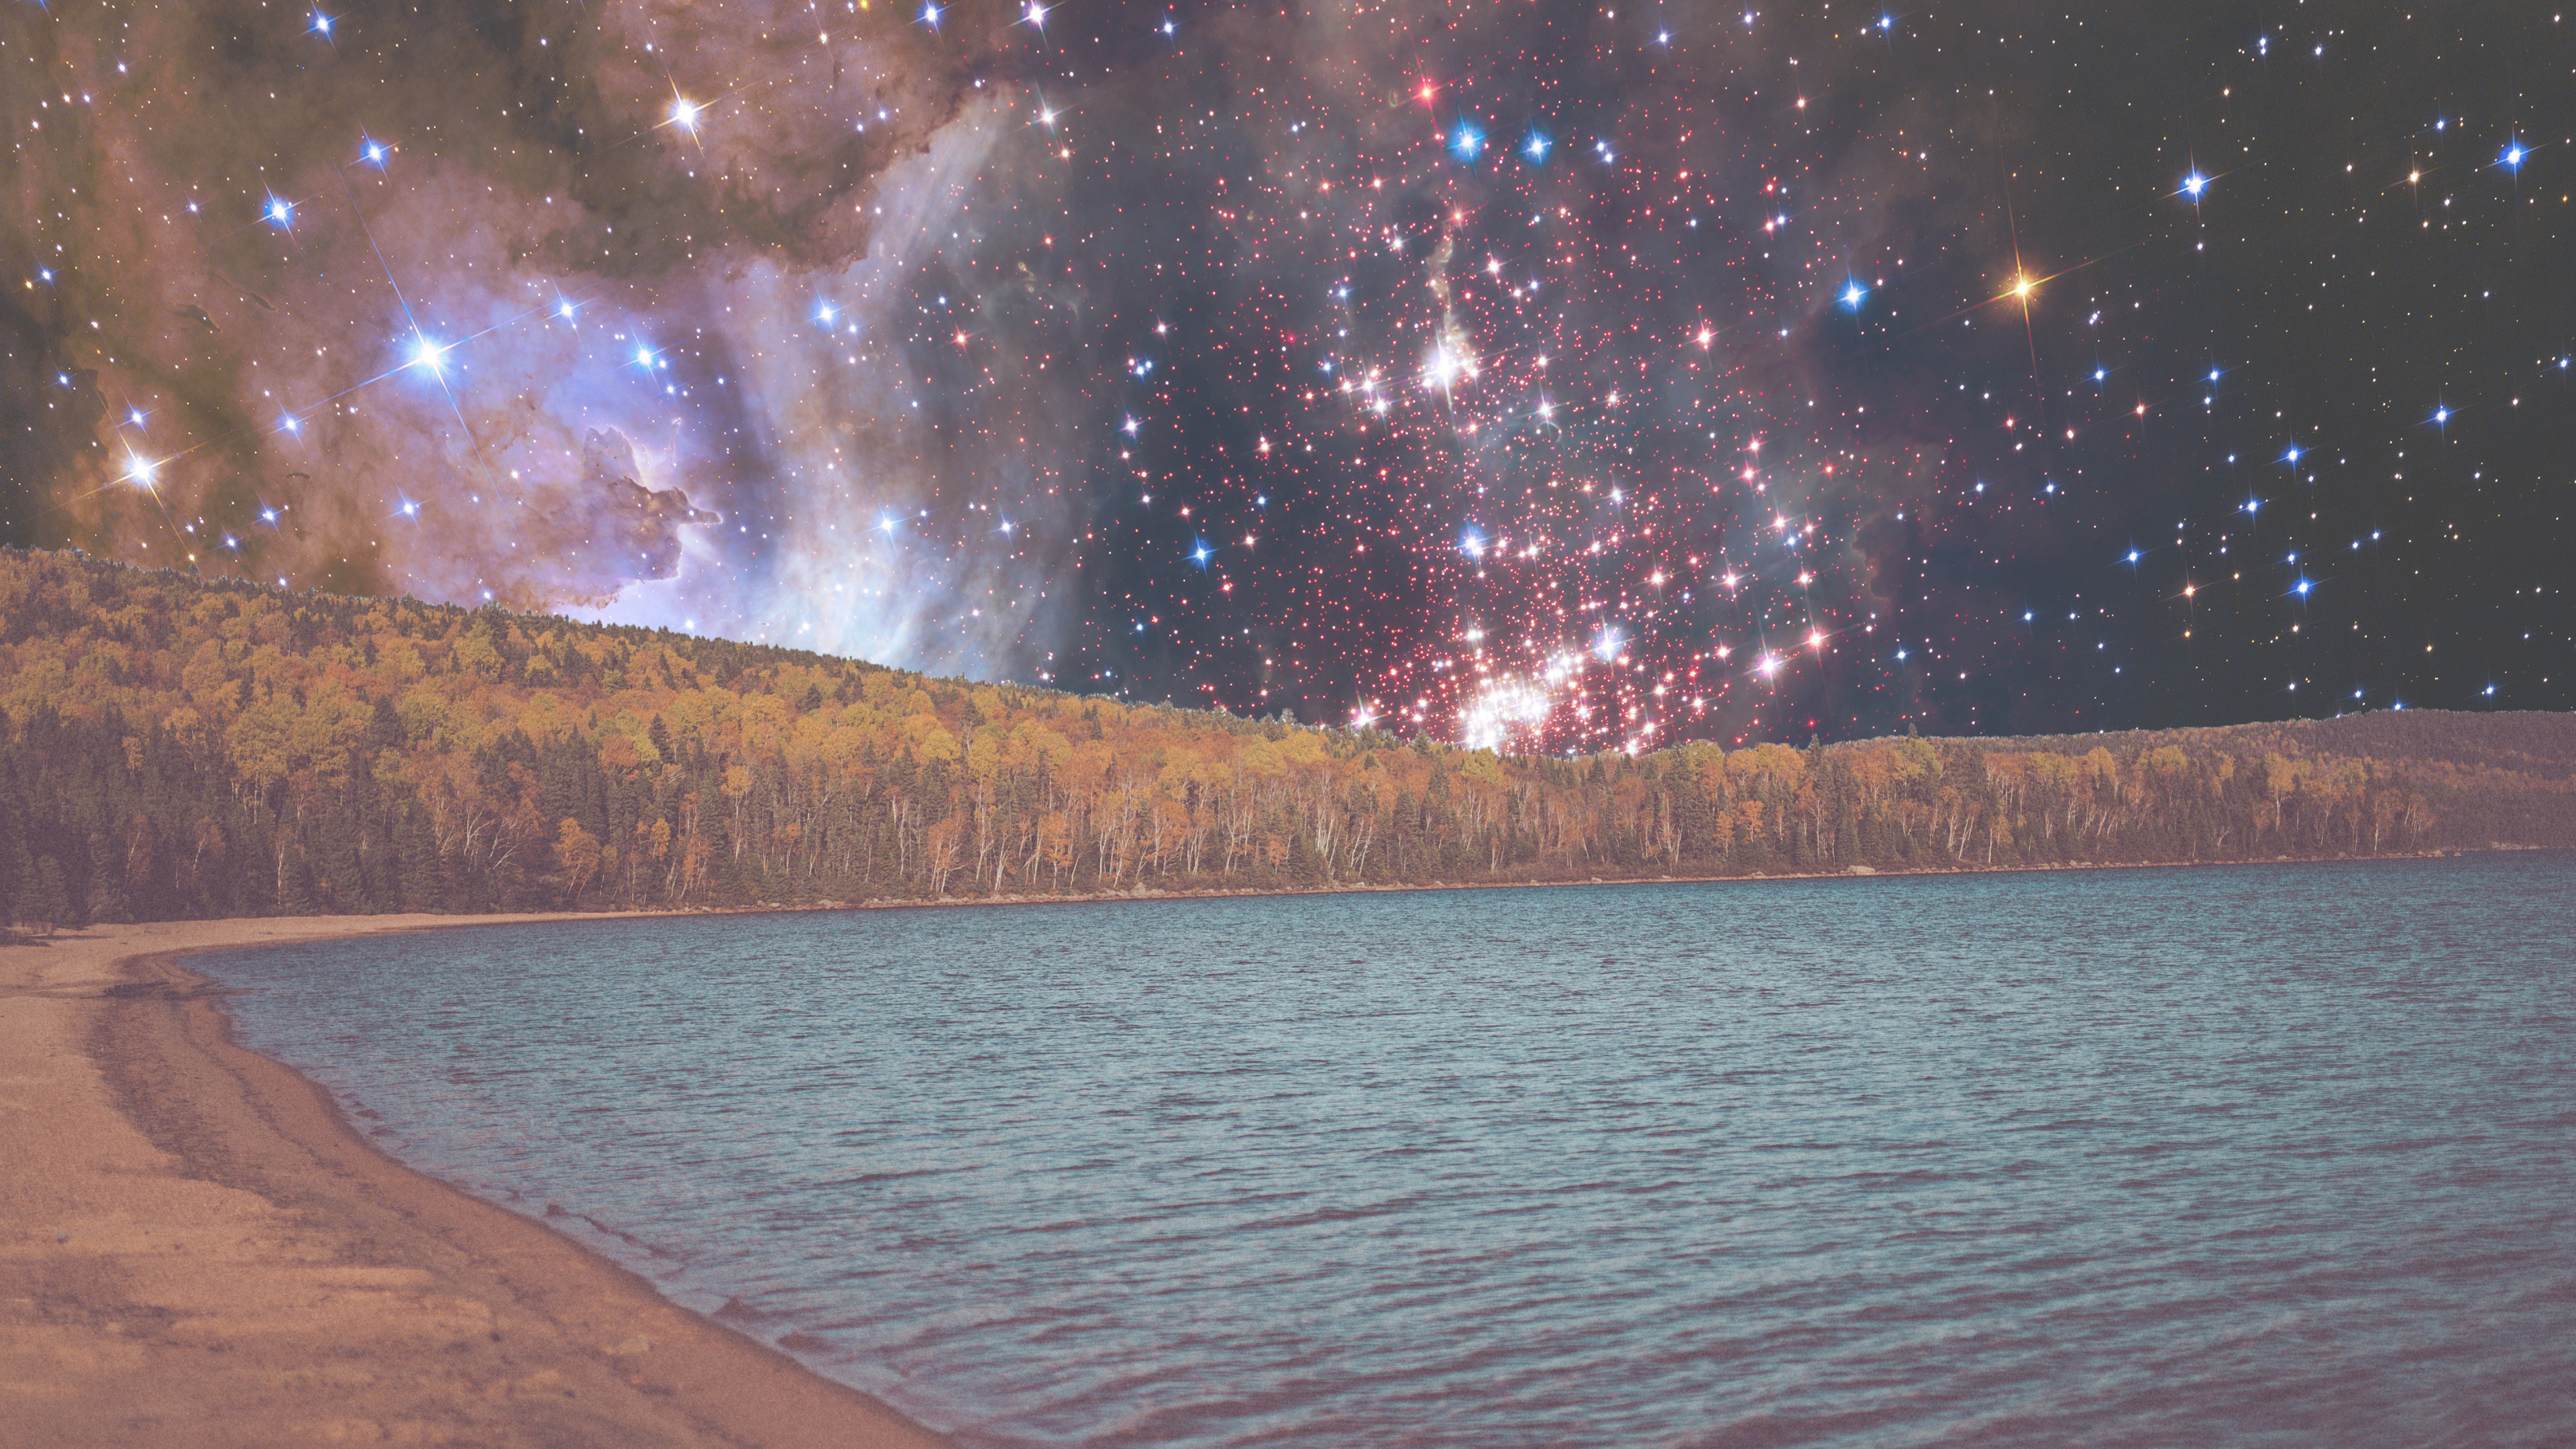 Lake Landscape Space Constellations 3840x2160